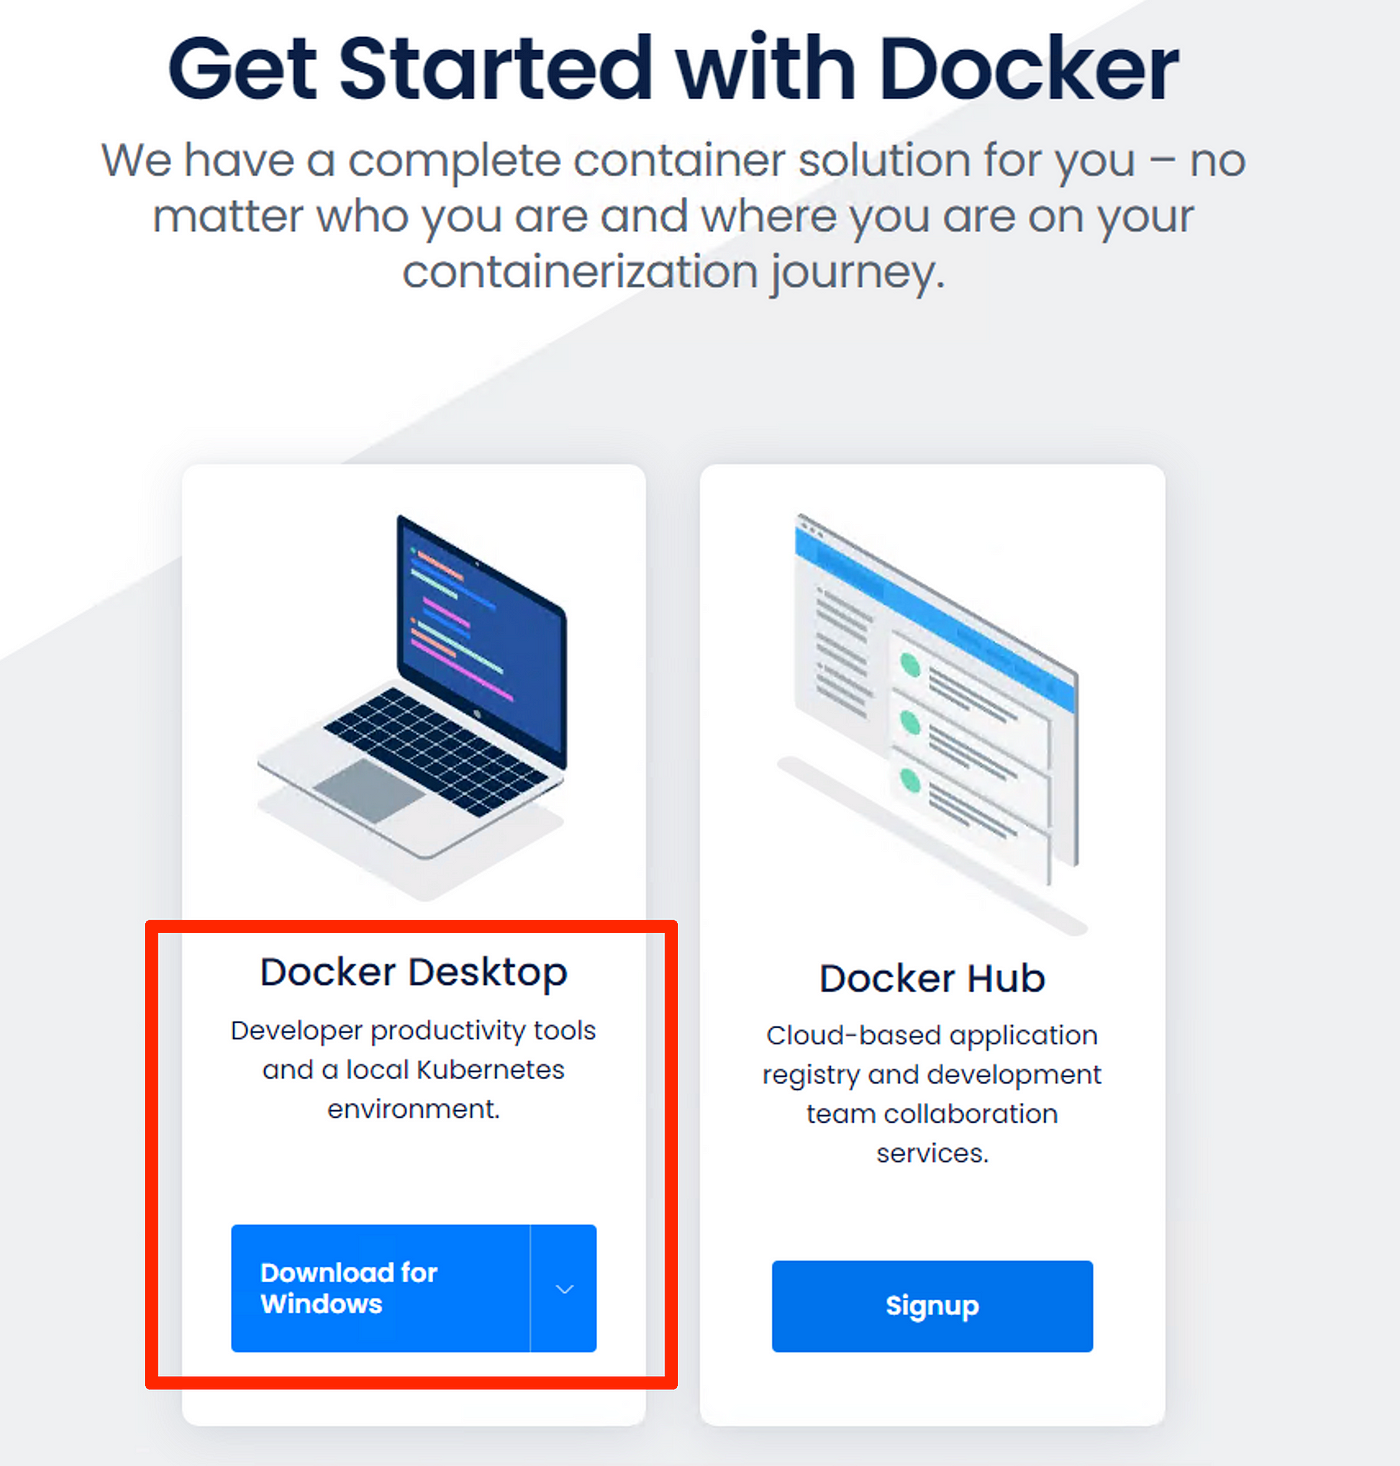 Docker container download for windows samsung galaxy tab a 10.1 sm t580 firmware download